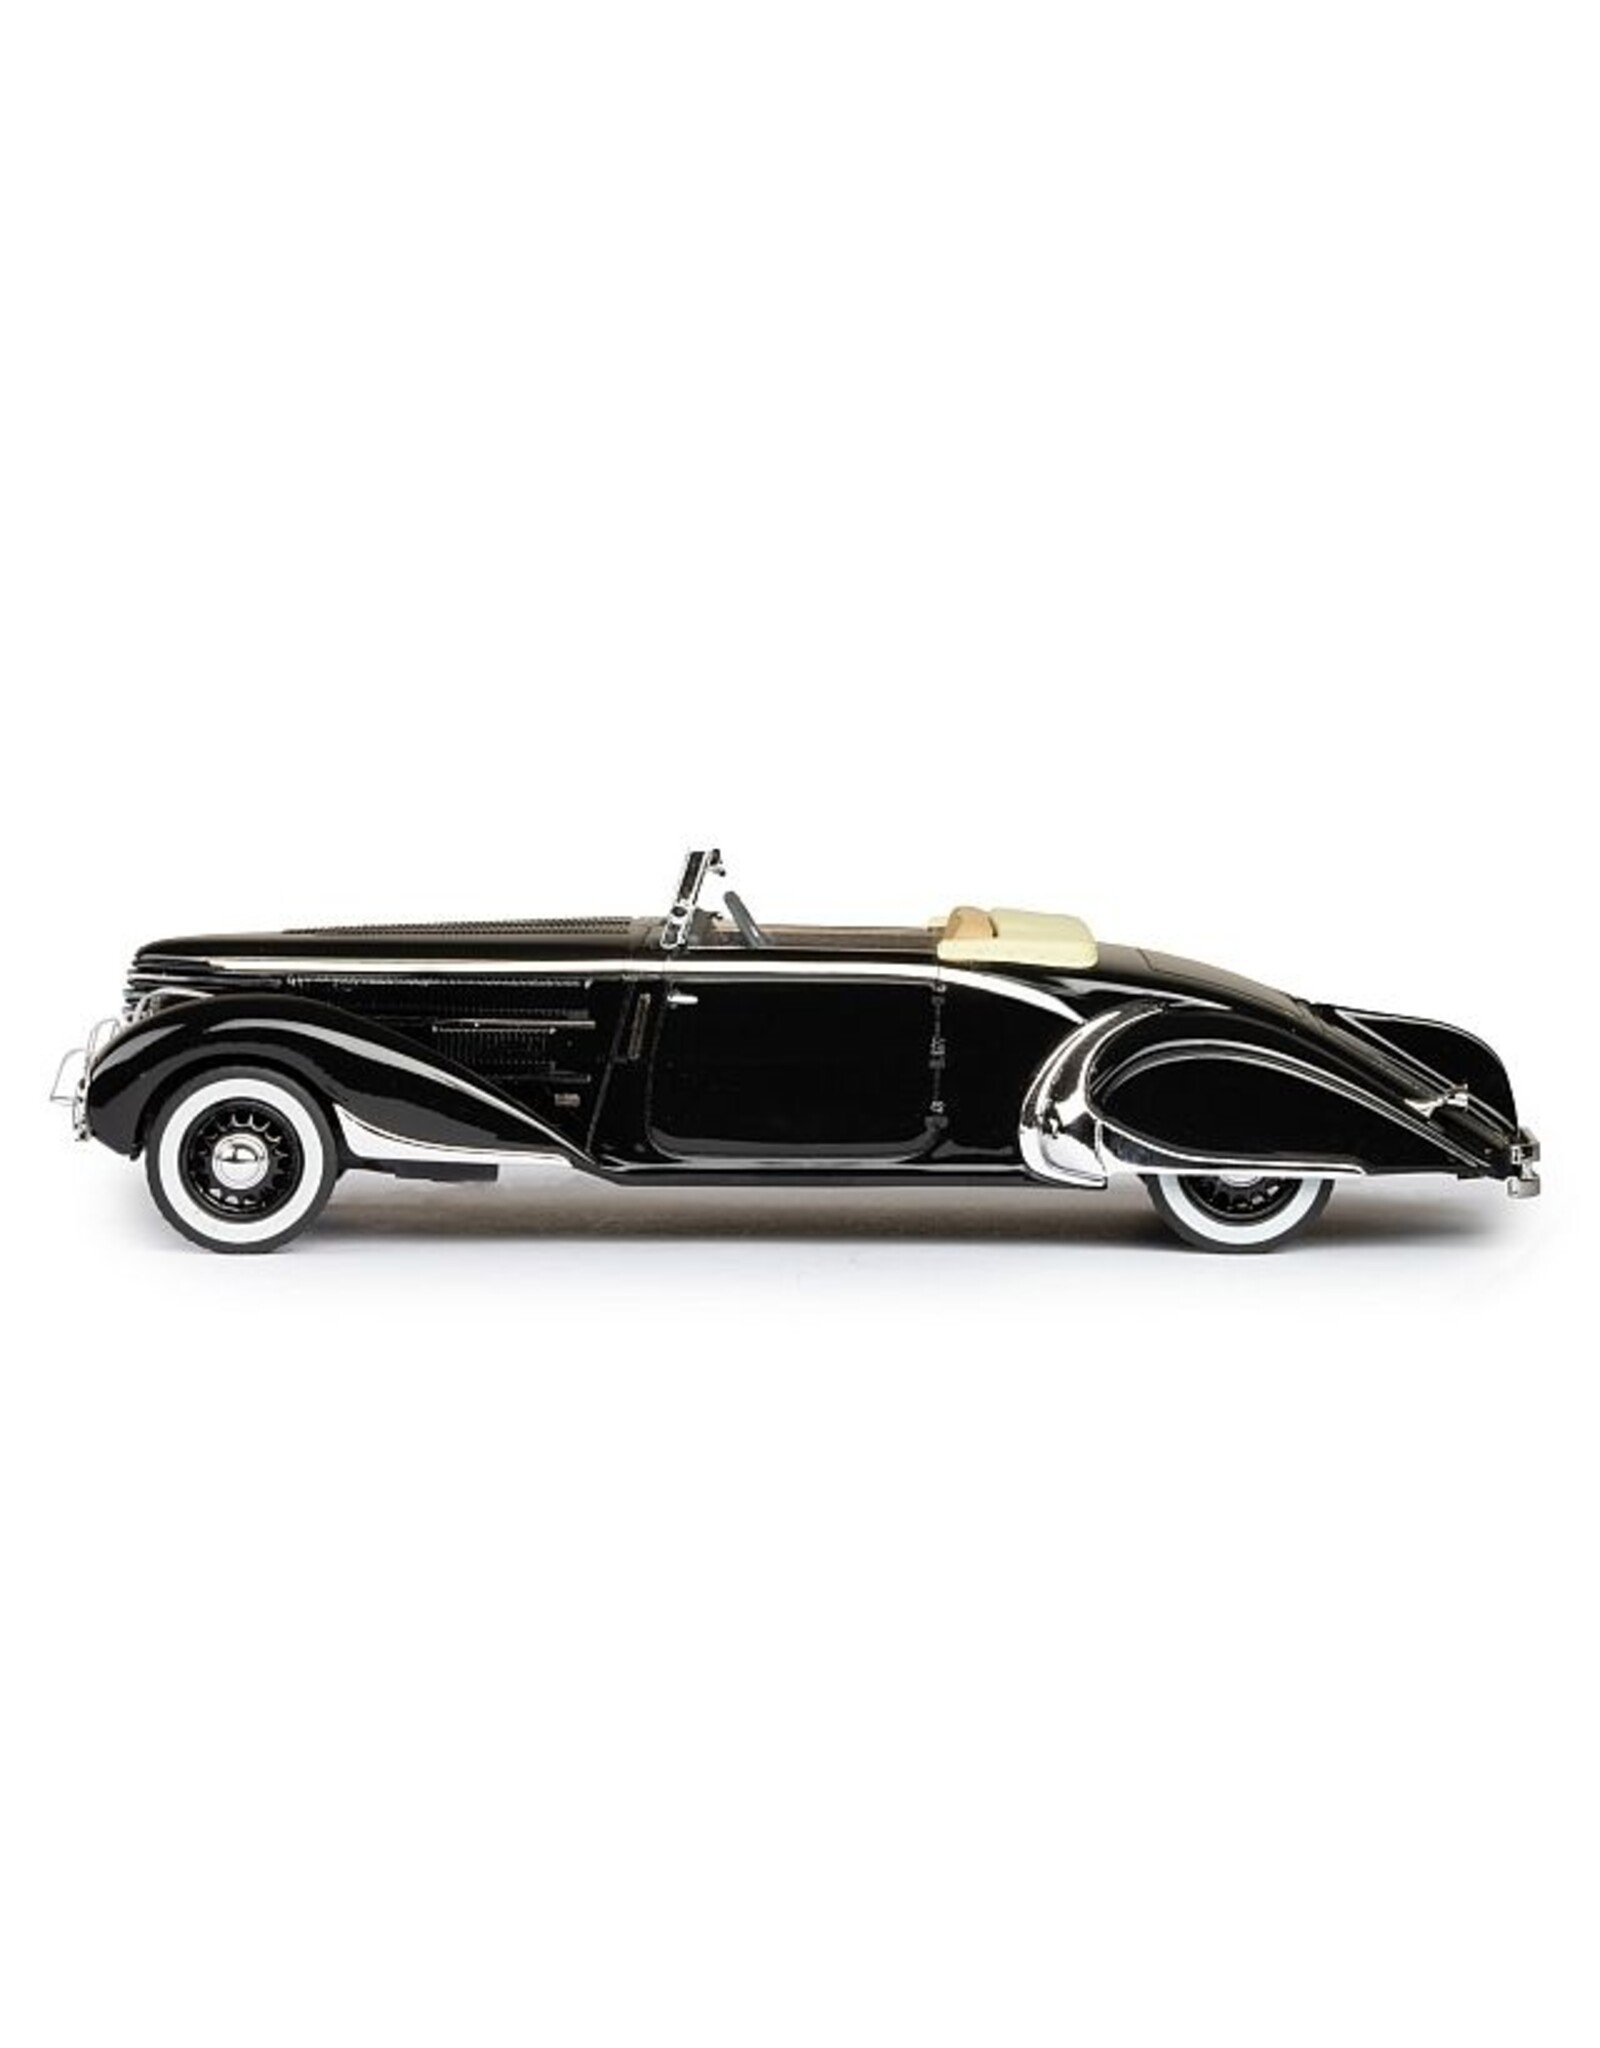 Delage by Chapron Delage D-8-85 Clabot by Henri Chapron(1935)open roof(with back bumper)black